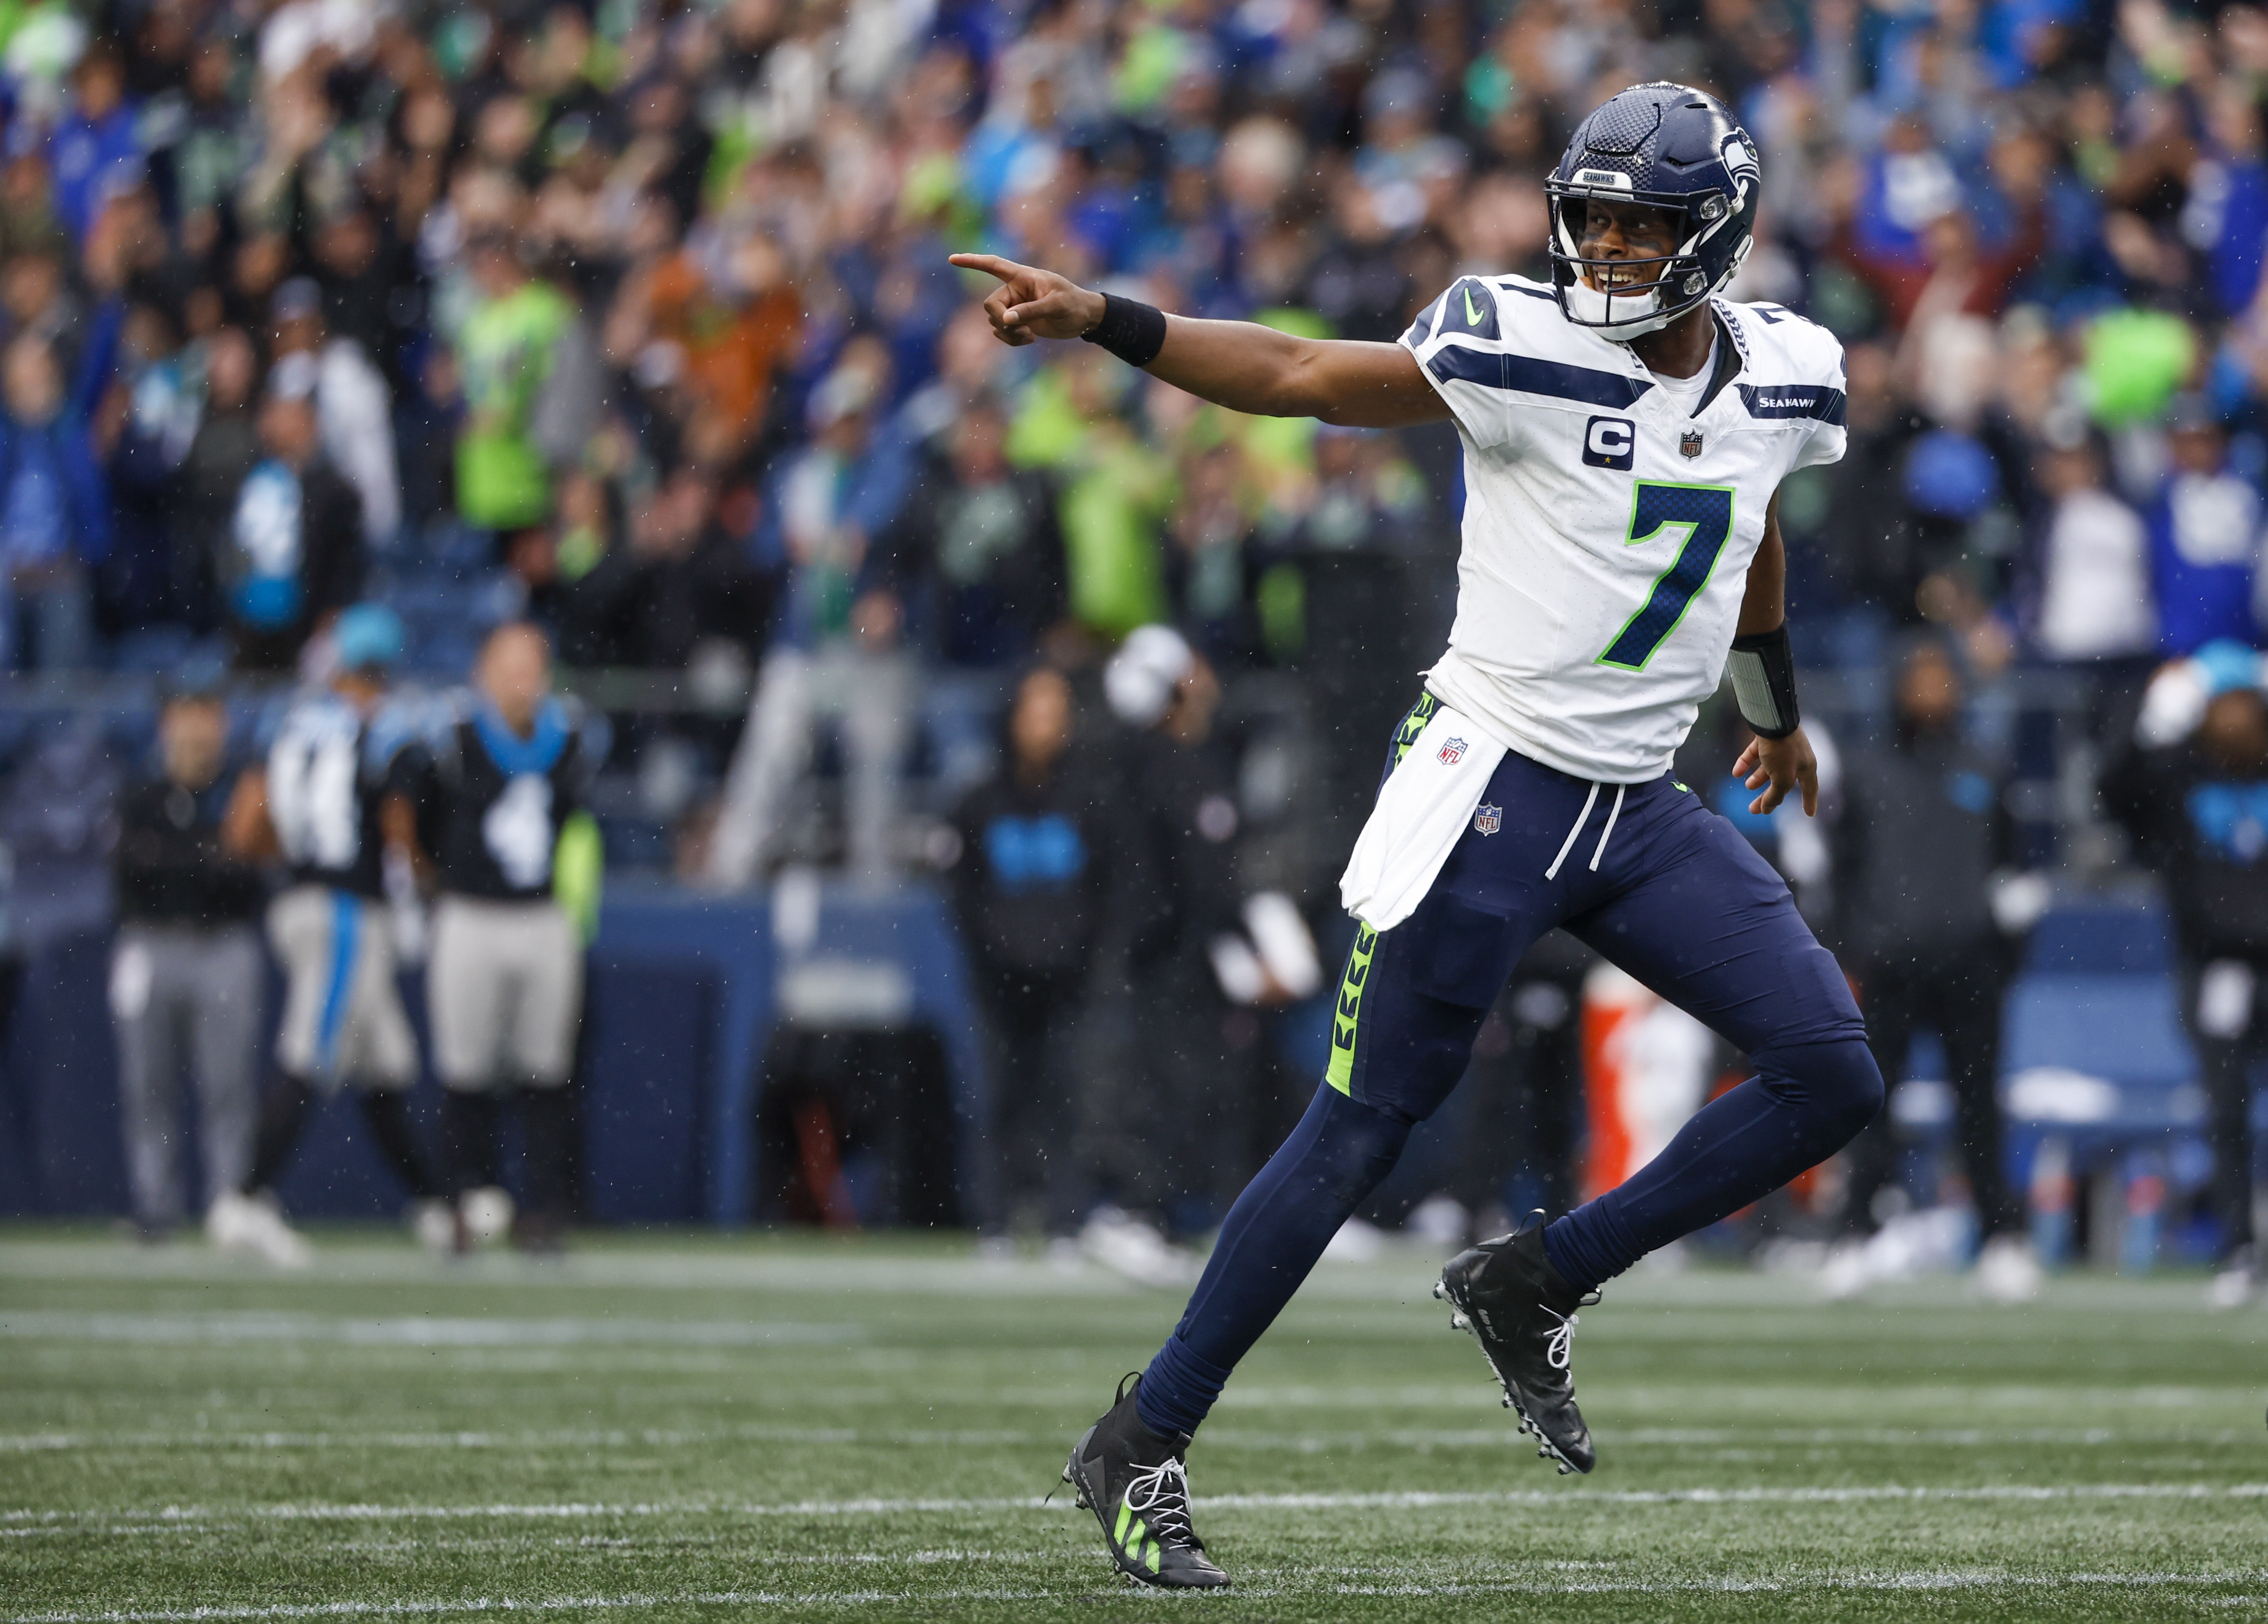 MNF Betting Odds: Seahawks at Giants Monday Night Football